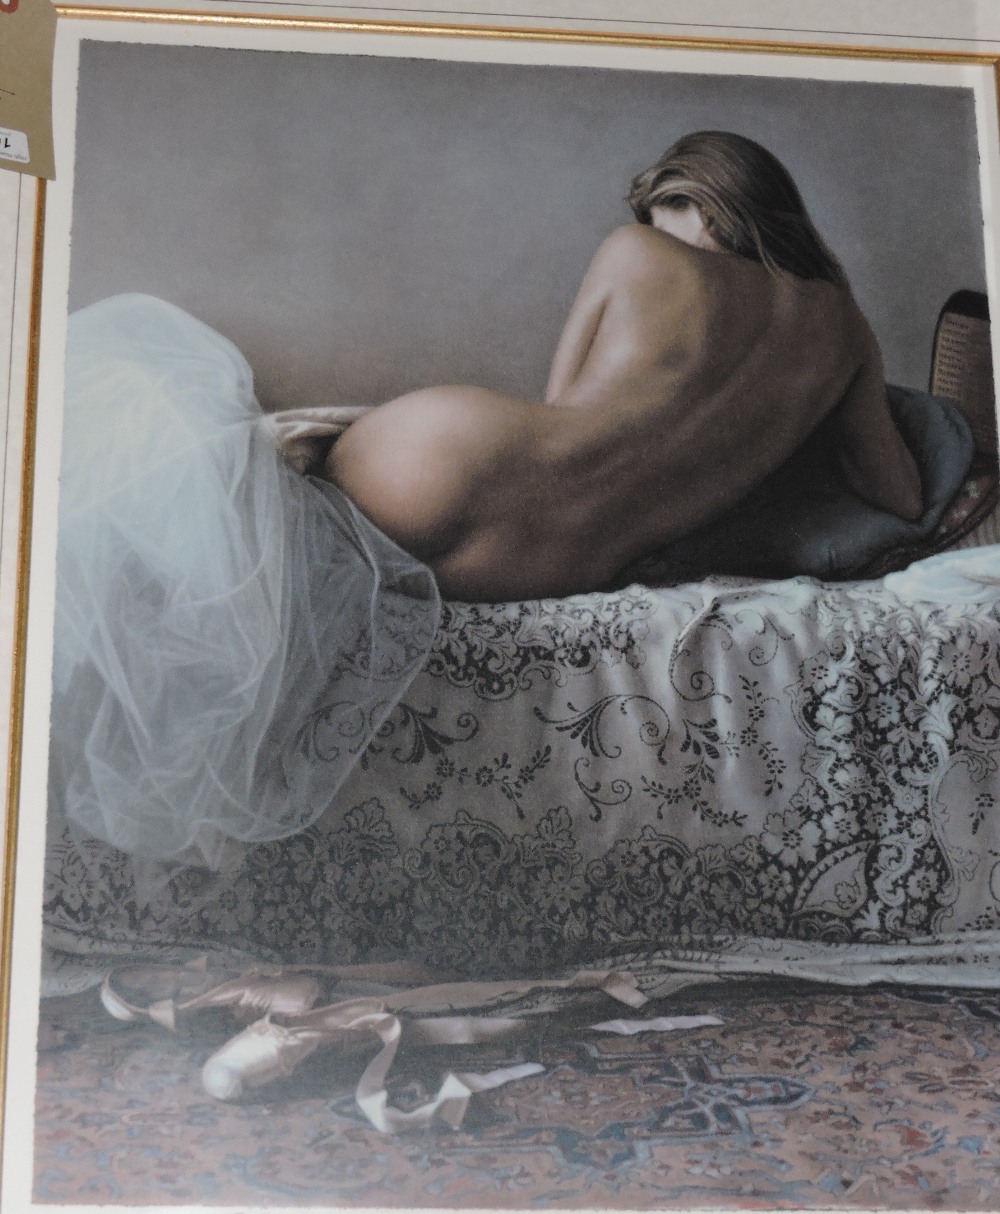 D. Hoffman (?) Ballerina, Limited Edition colour print, 178/275, mount signed in pencil, 70cm x